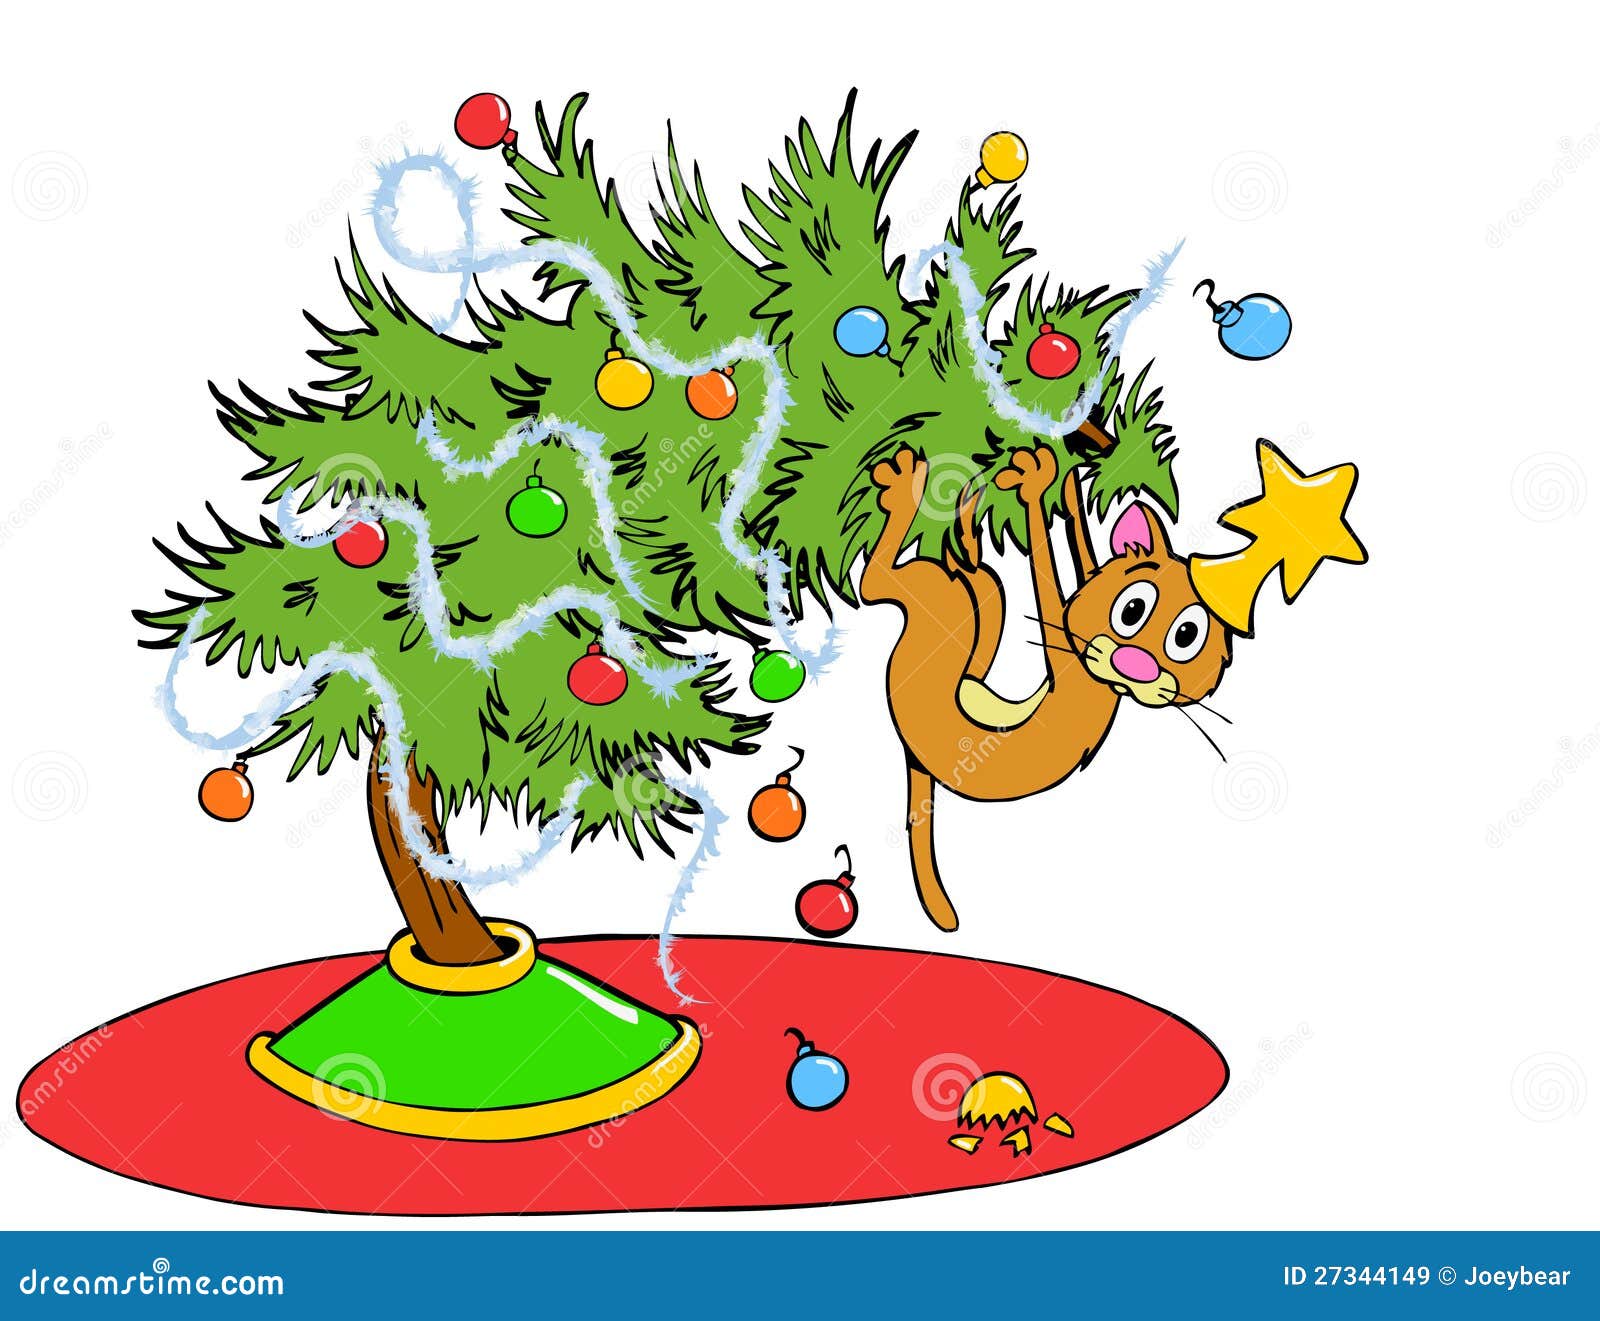 clipart cat in tree - photo #48